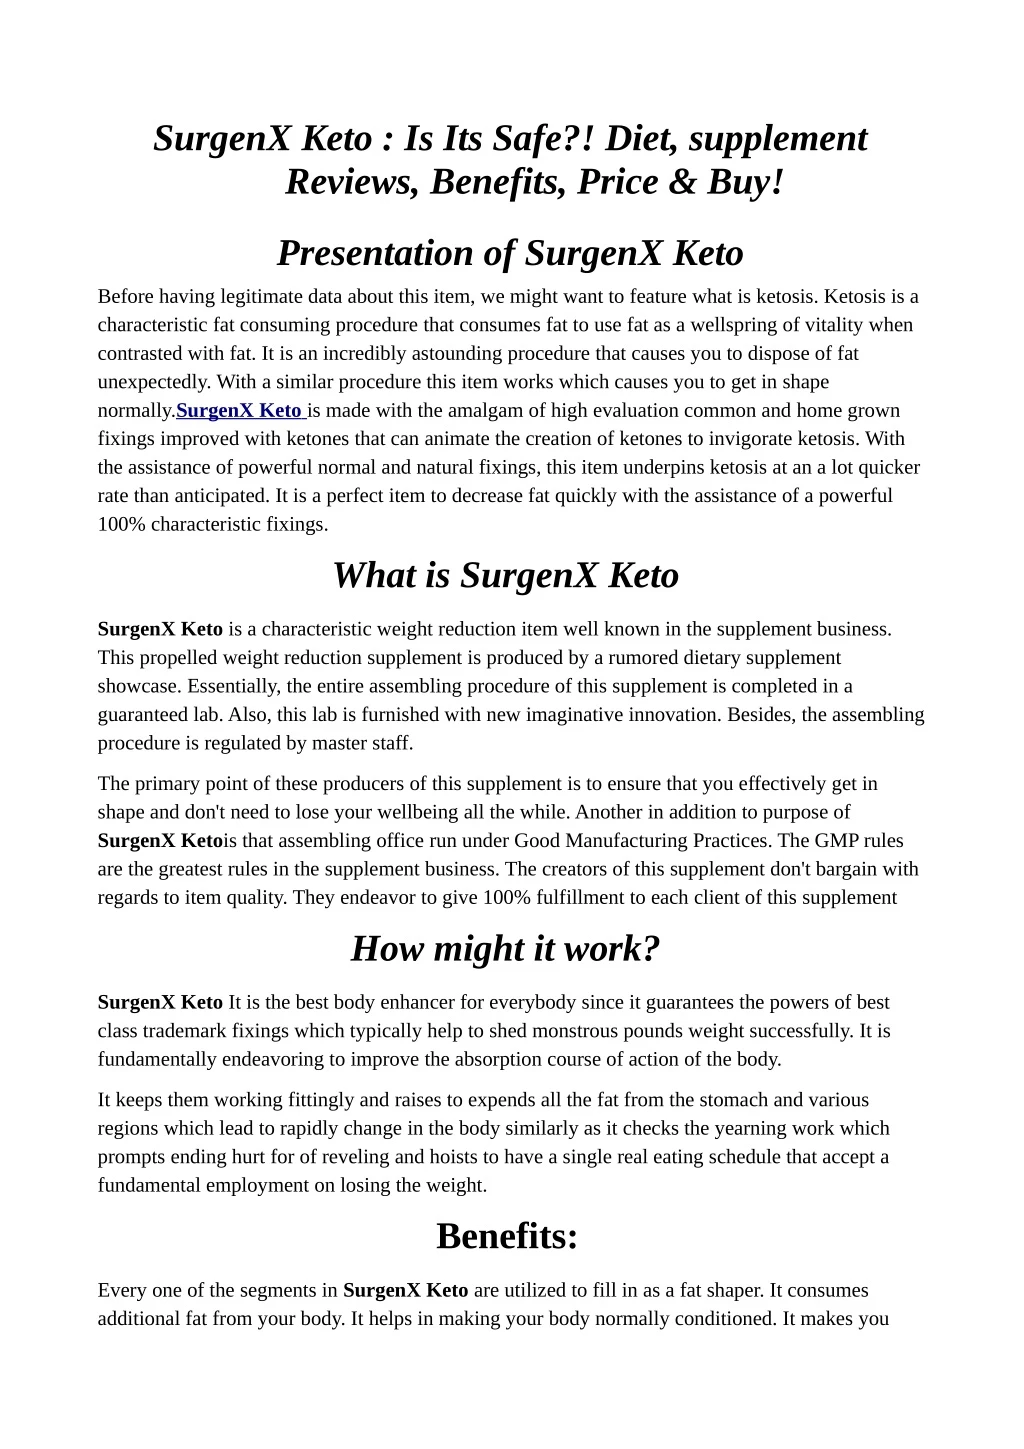 surgenx keto is its safe diet supplement reviews